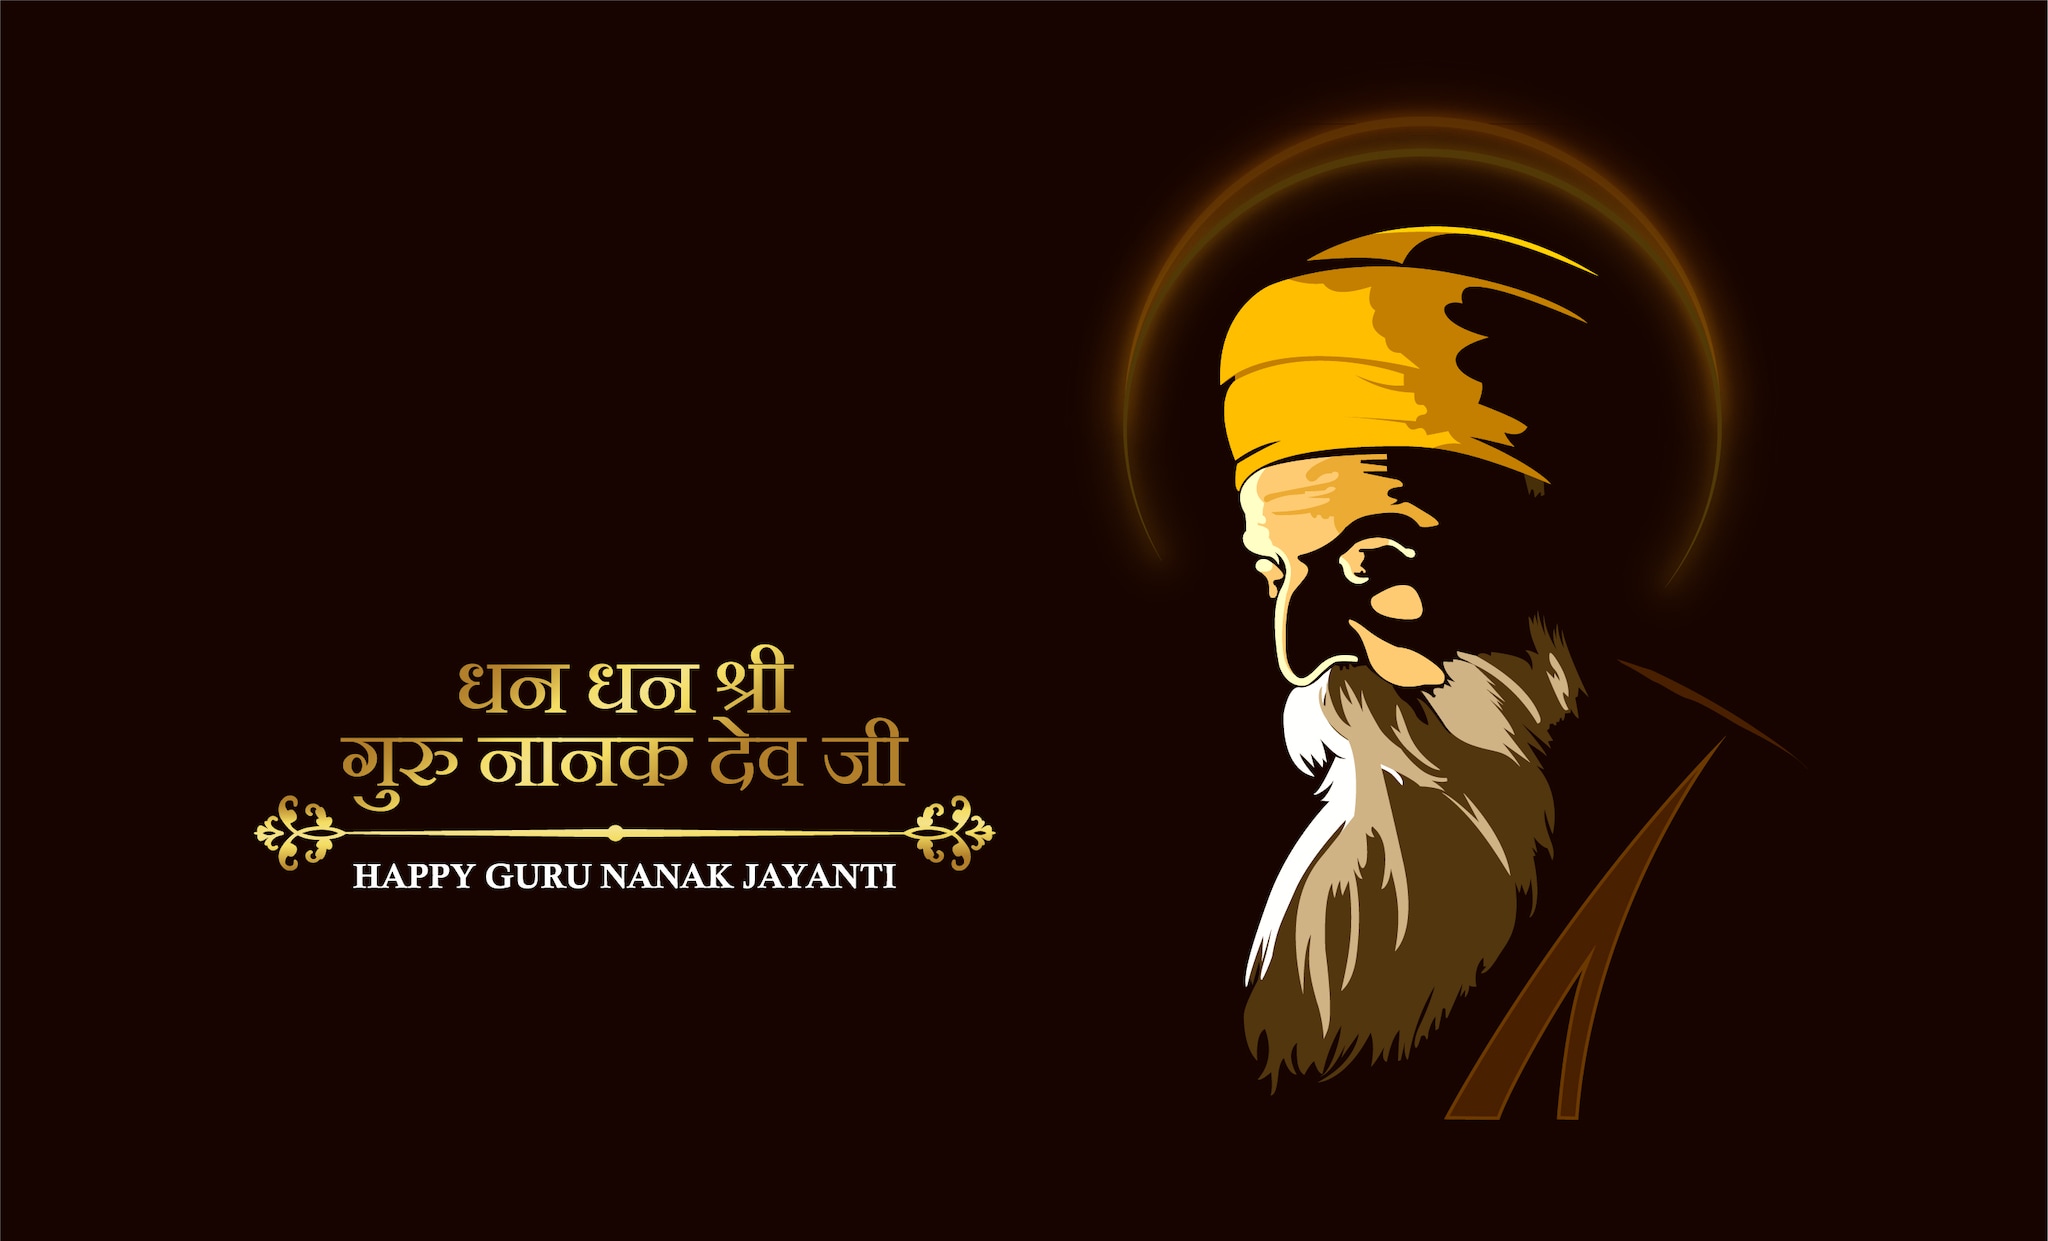 Happy Guru Nanak Jayanti 2021: Wishes Images, Quotes, Photos, Pics, Facebook SMS and Messages. (Image: Shutterstock)